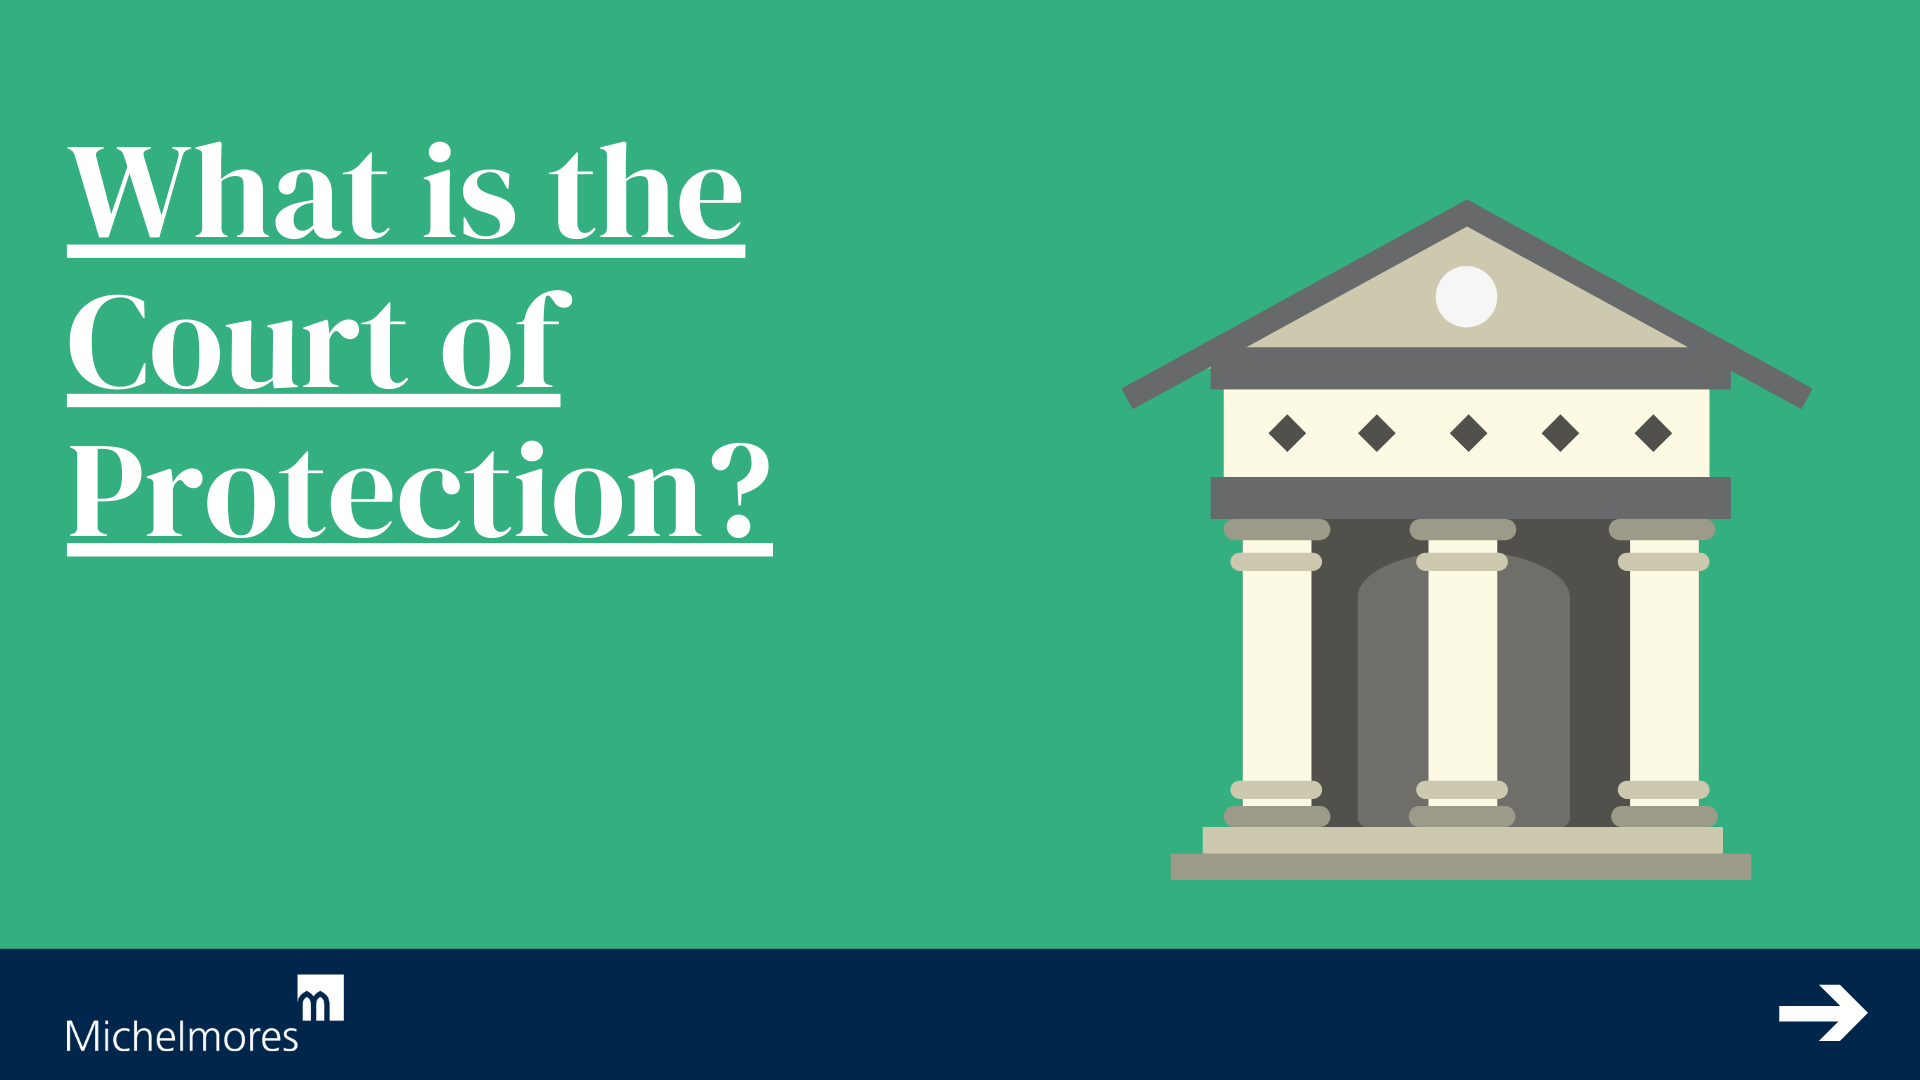 What is the Court of Protection?